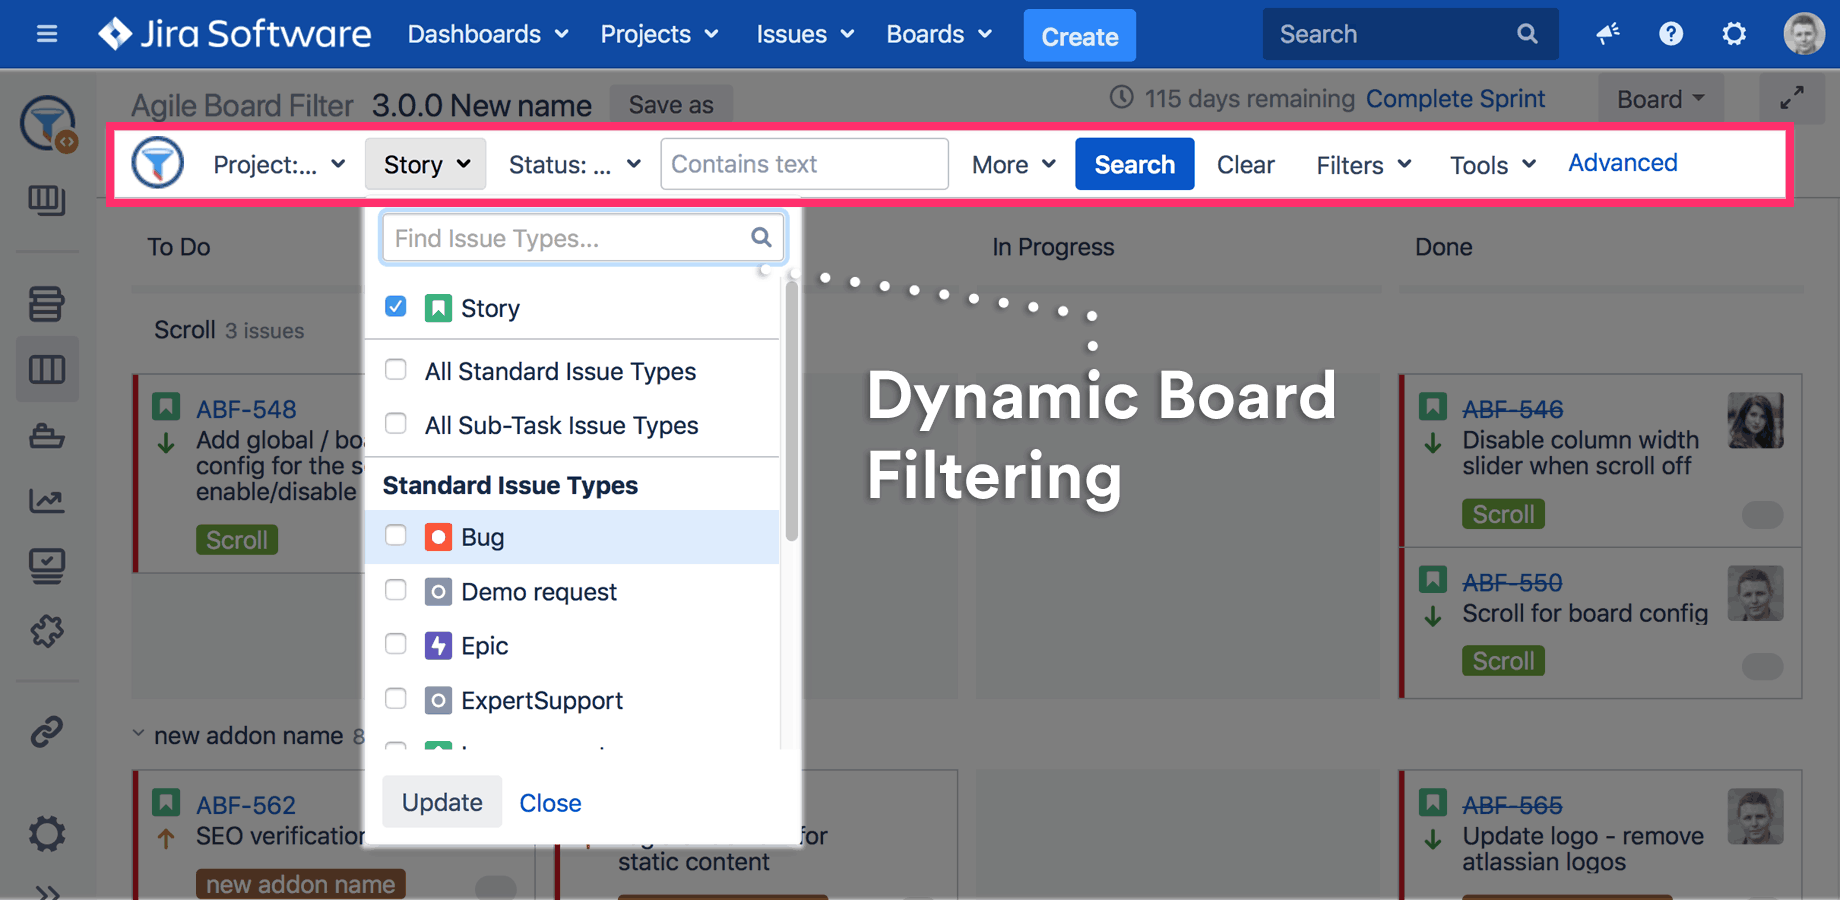 Agile Tools & Filters for Jira